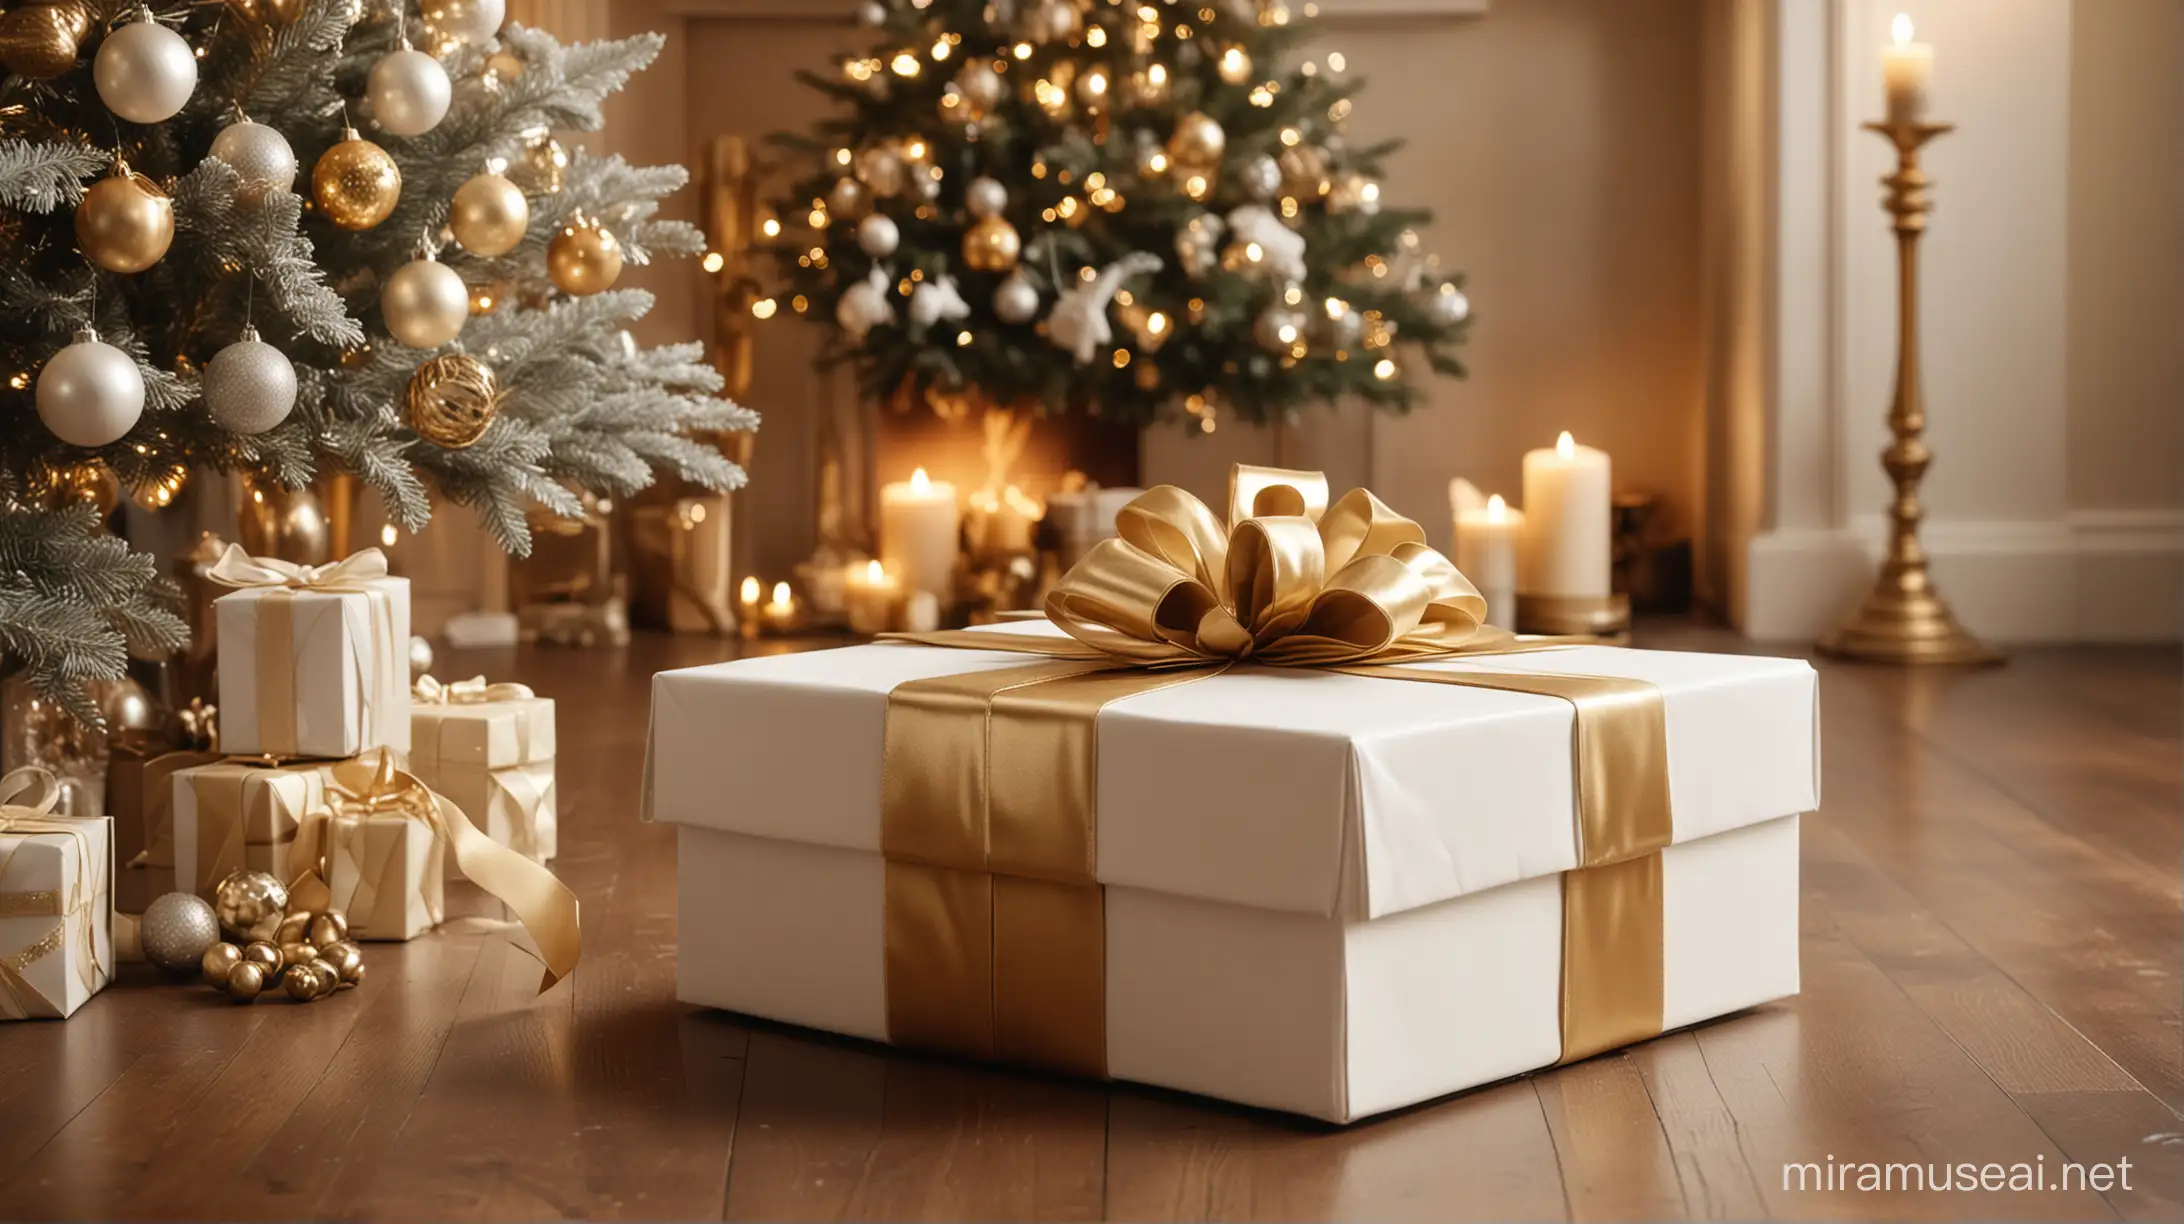 create a hyperrealistic  close up shot image of a 1920s inspired luxury holiday party that reflects classy upper class taste. The holiday party aesthetic should include a white, gold and silver color palette with a burning fireplace, a white holiday tree with presents and magical lighting in the background. The foreground of the image is a close up shot showing a white box with minimalistic gold art deco print wrapped in a bow being exchanged between a man  Men dressed in tux and women in 1920s inspired dresss and accessories.